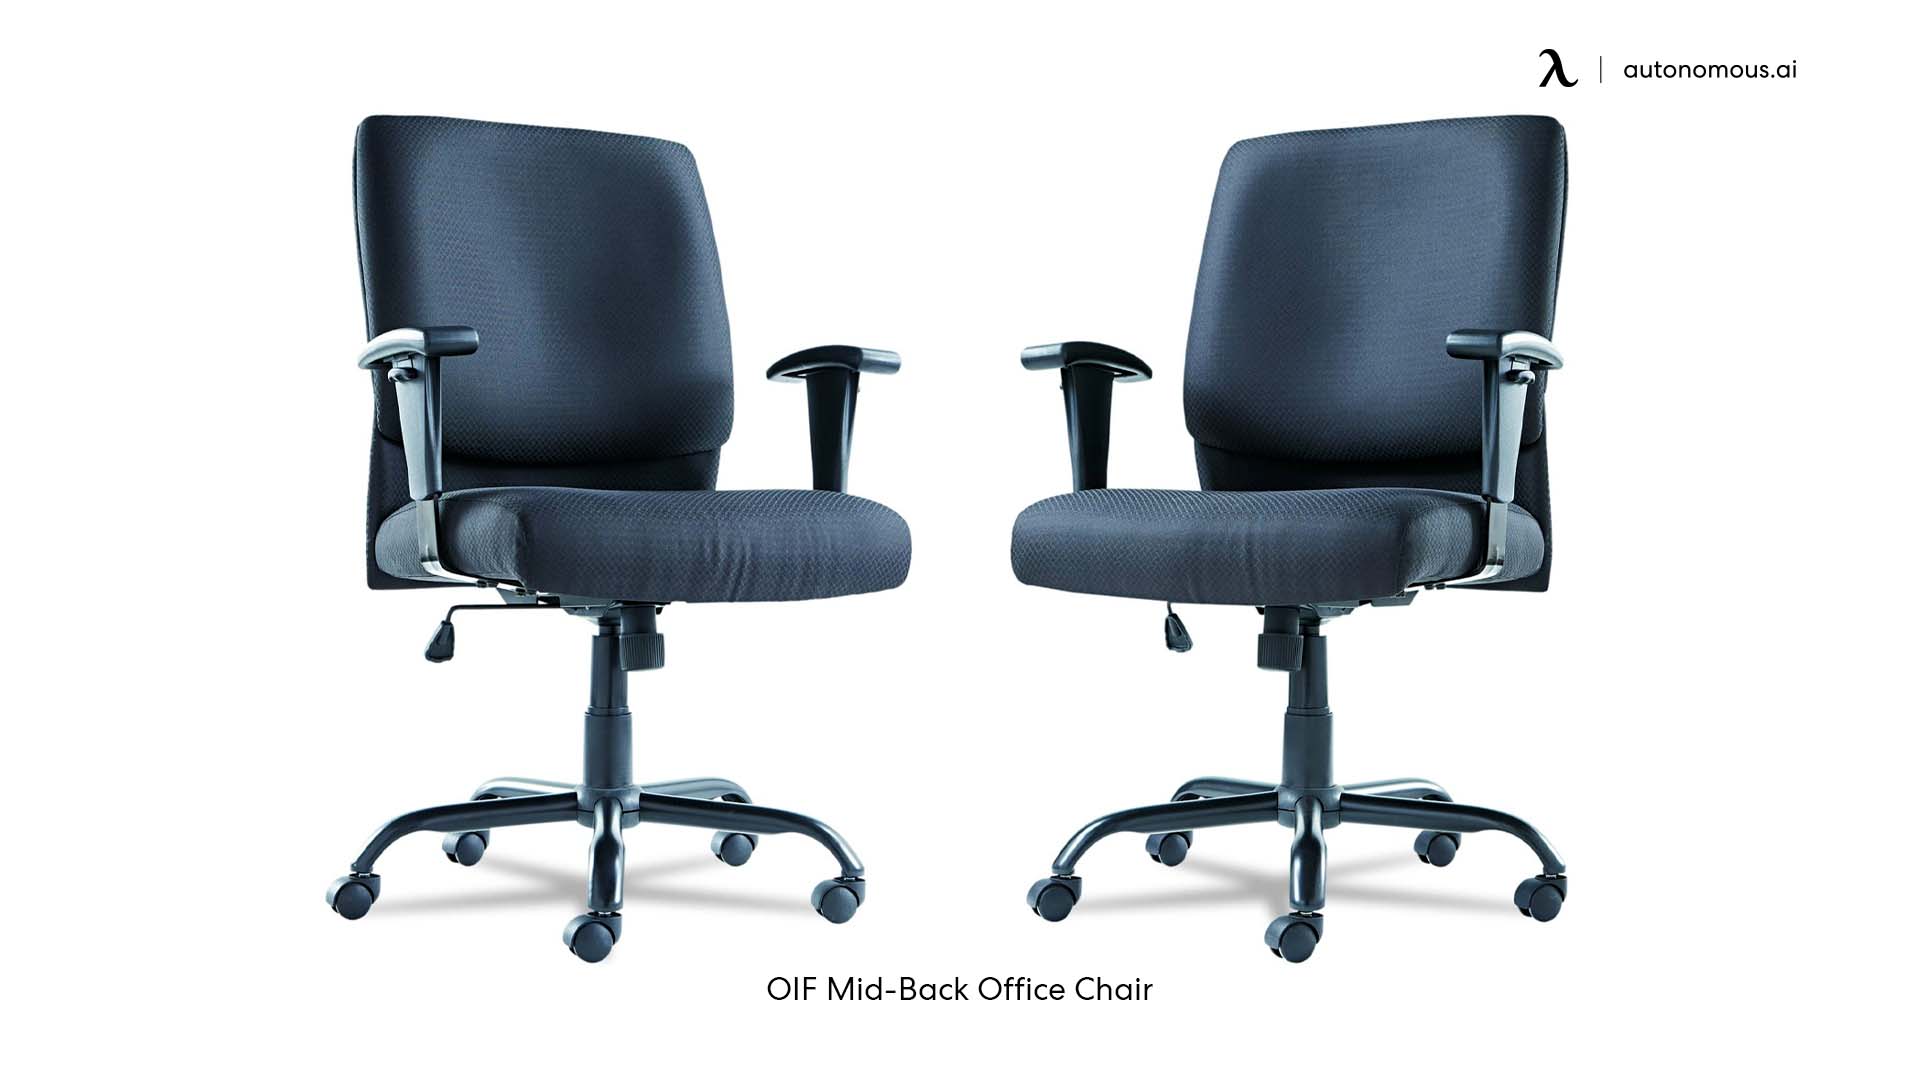 OIF Mid-Back Office Chair